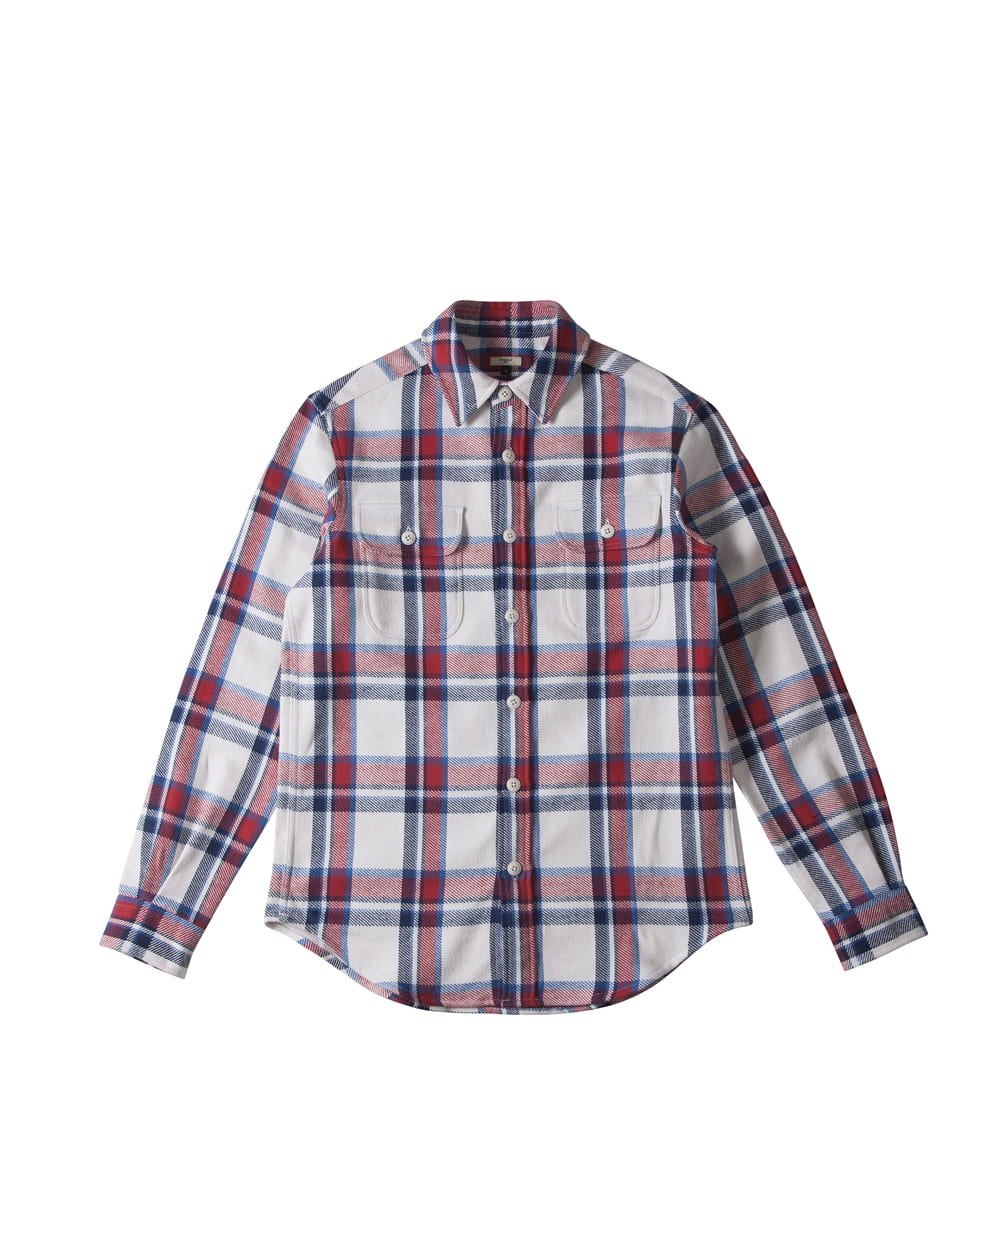 FLANNEL CHECK OVER SHIRT WHITEFRANK J (프랭크제이)